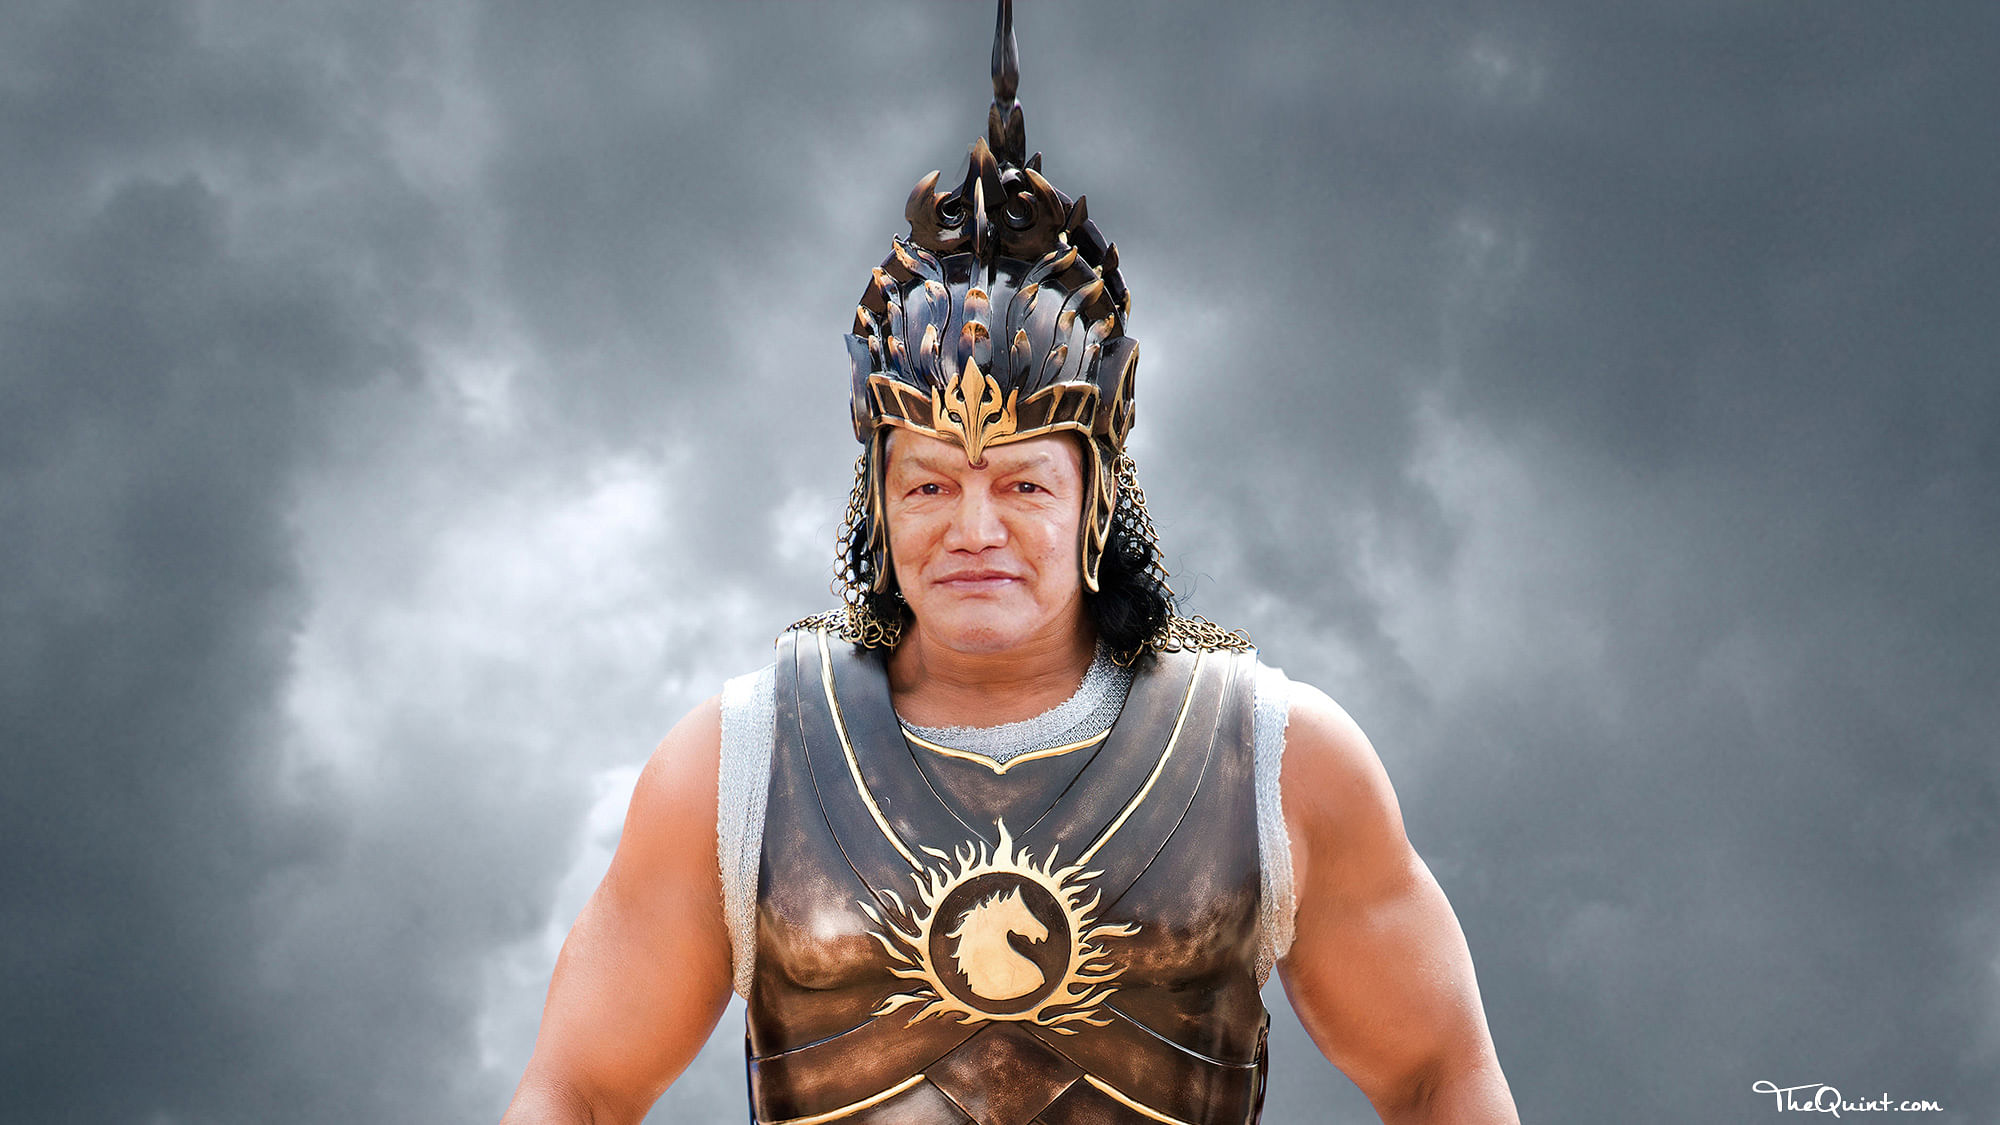 The latest video that has gone viral features Uttarakhand Chief Minister and Congress leader Harish Rawat as Baahubali. (Photo: The Quint)